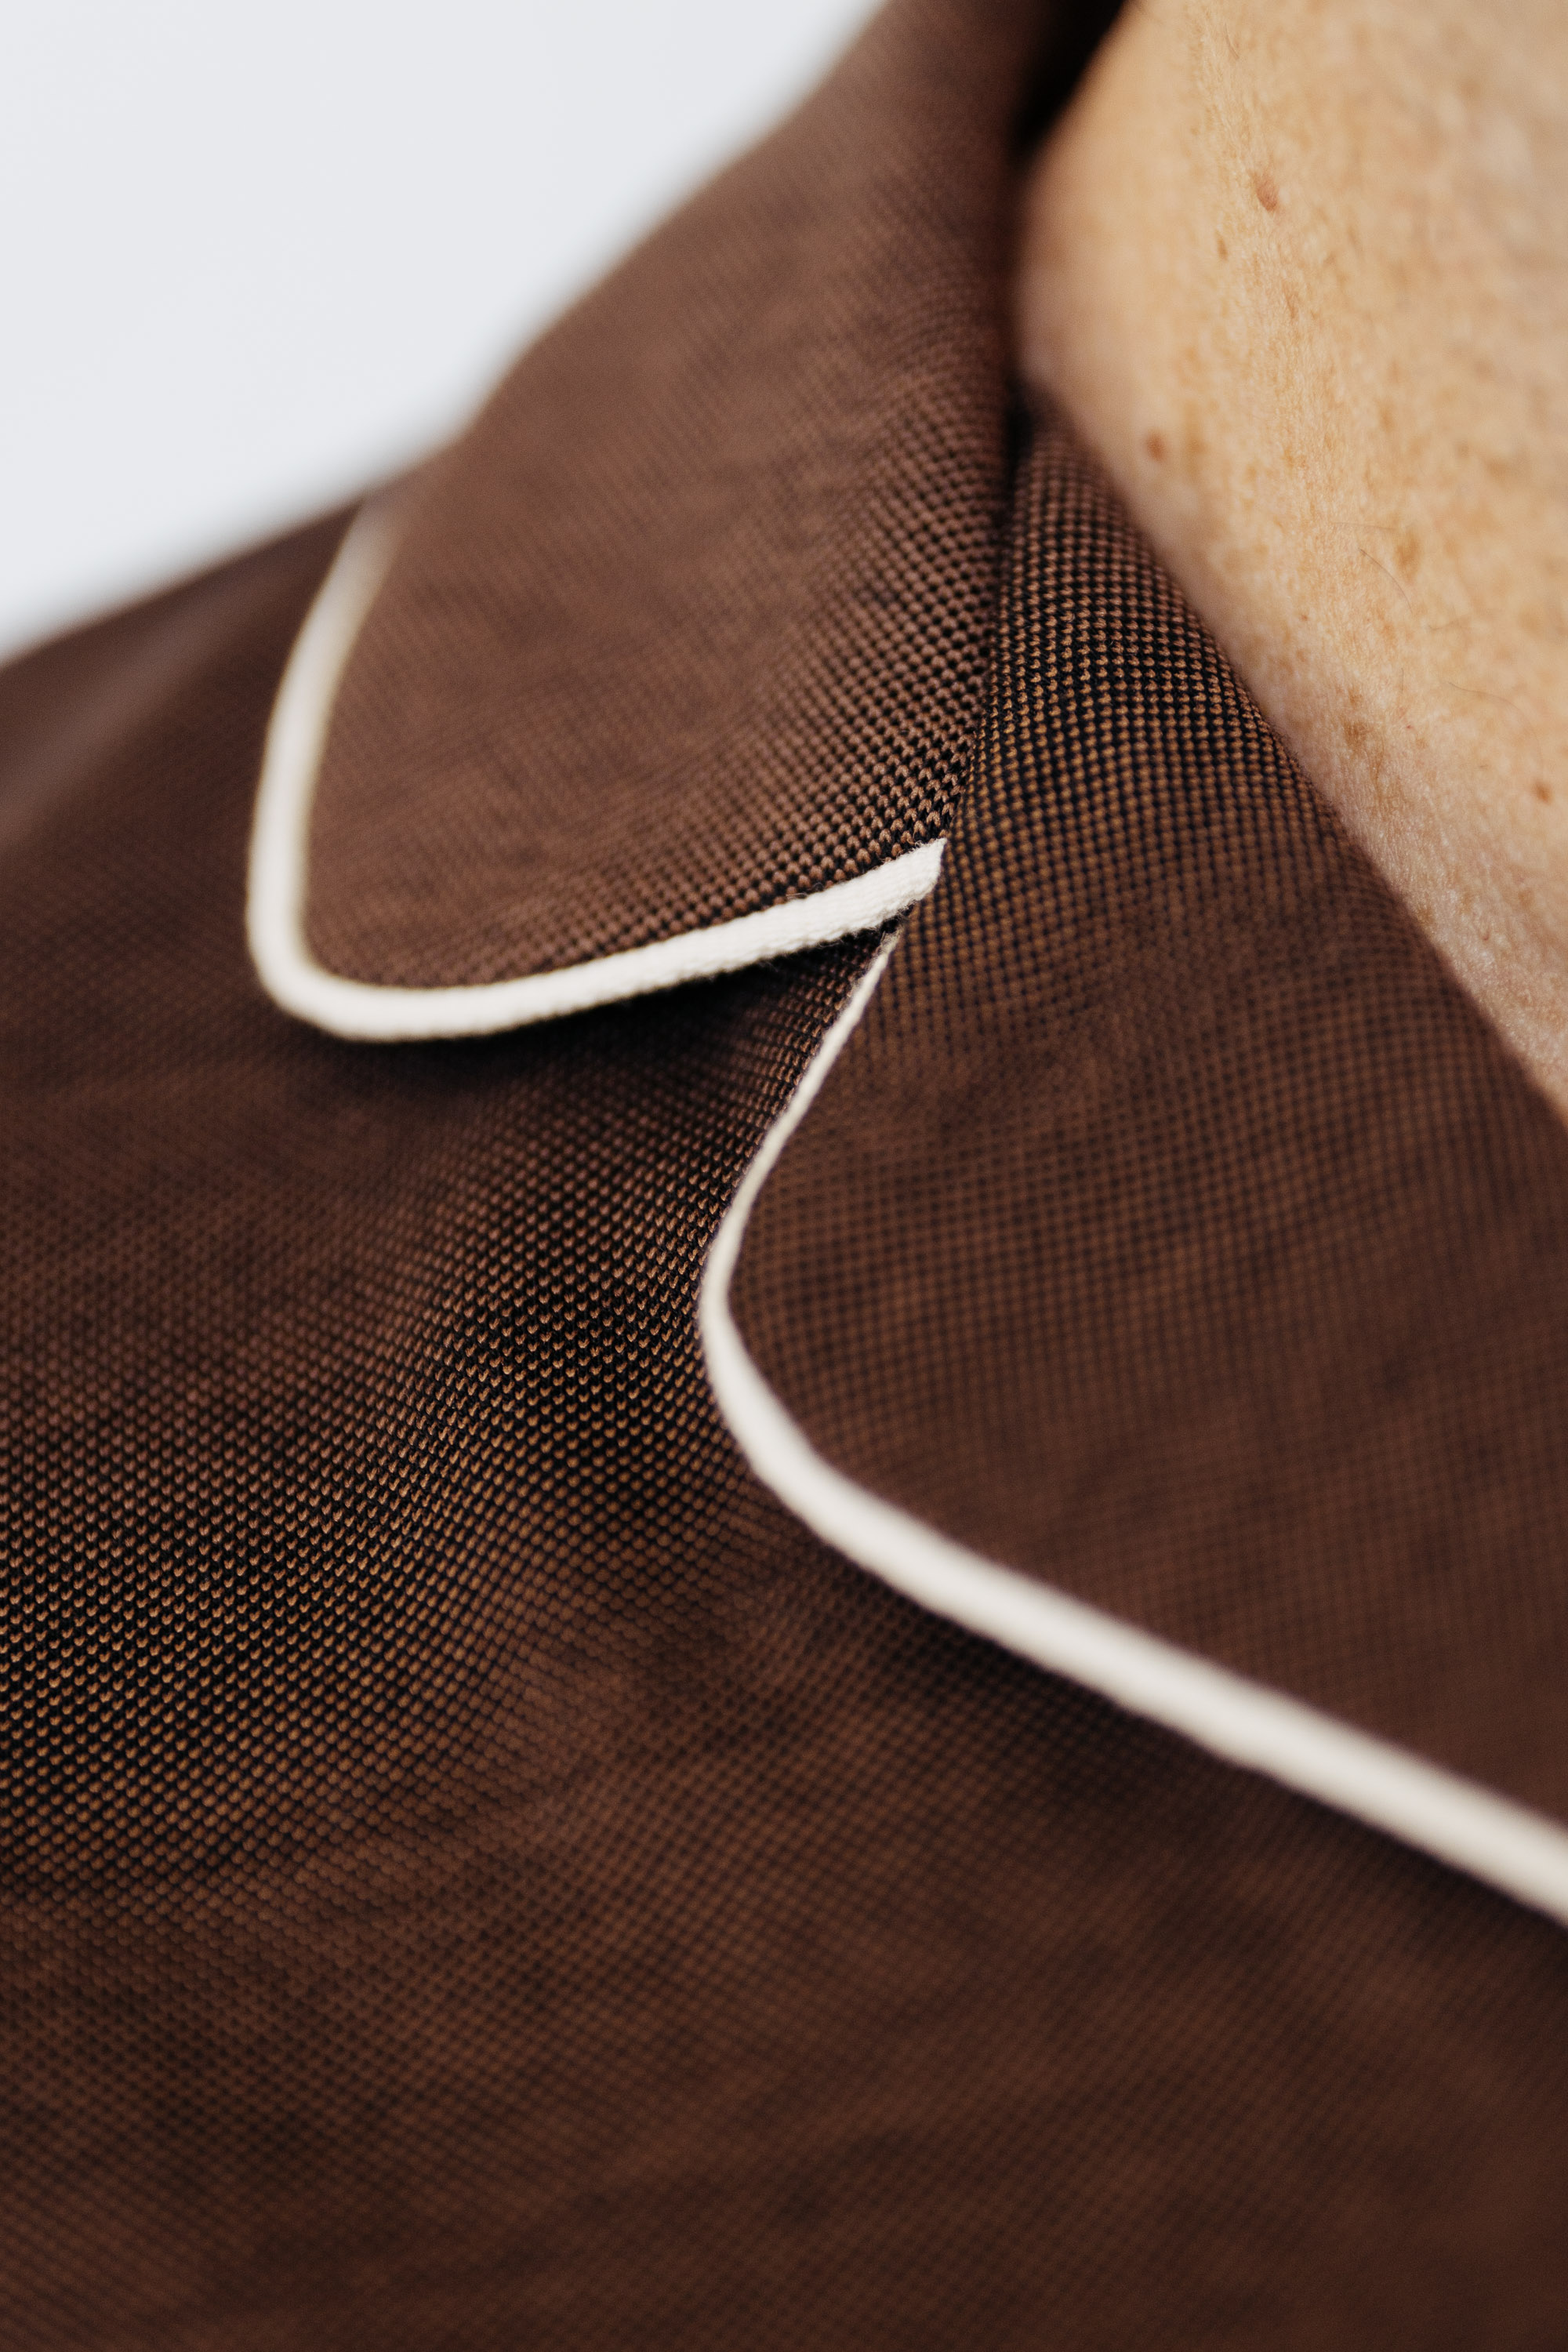 Brown polo shirt collar seamed with withe stripe in retro design